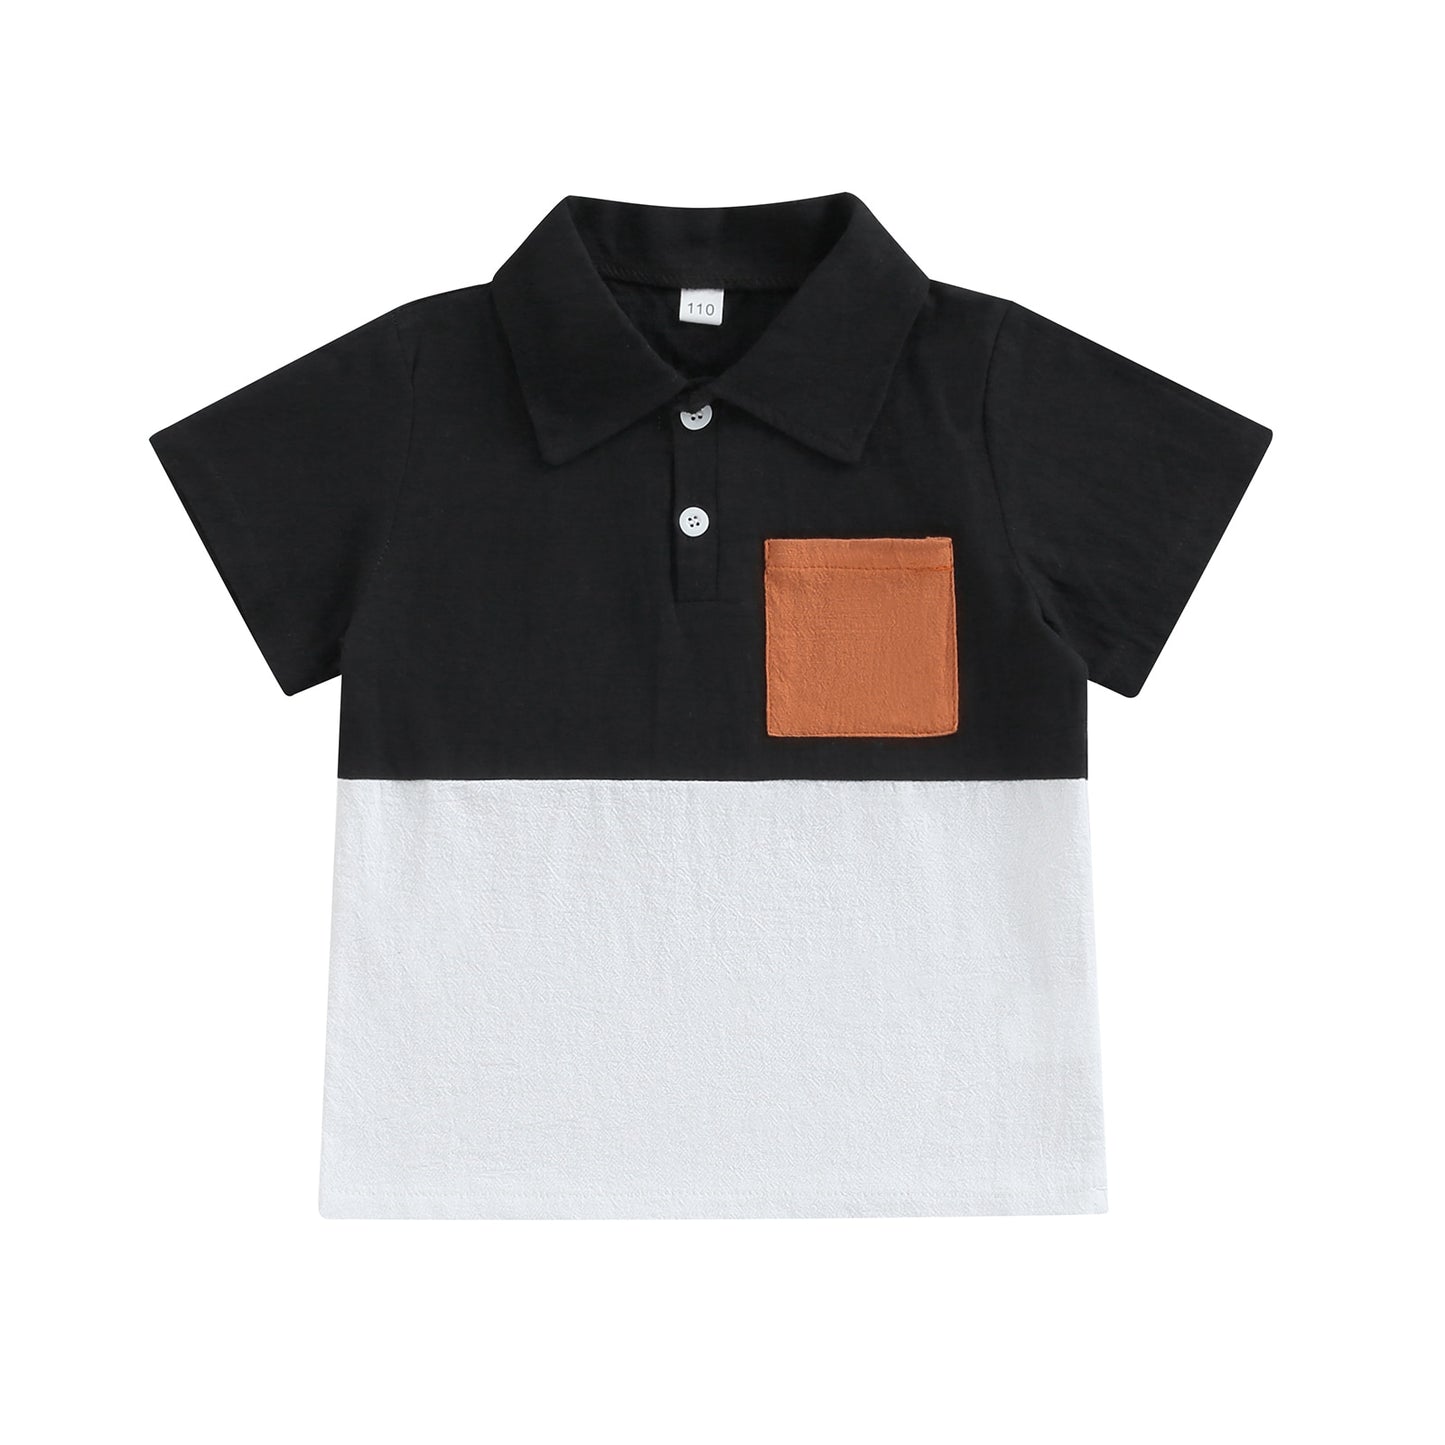 Little man casual short sleeves with pocket t shirt